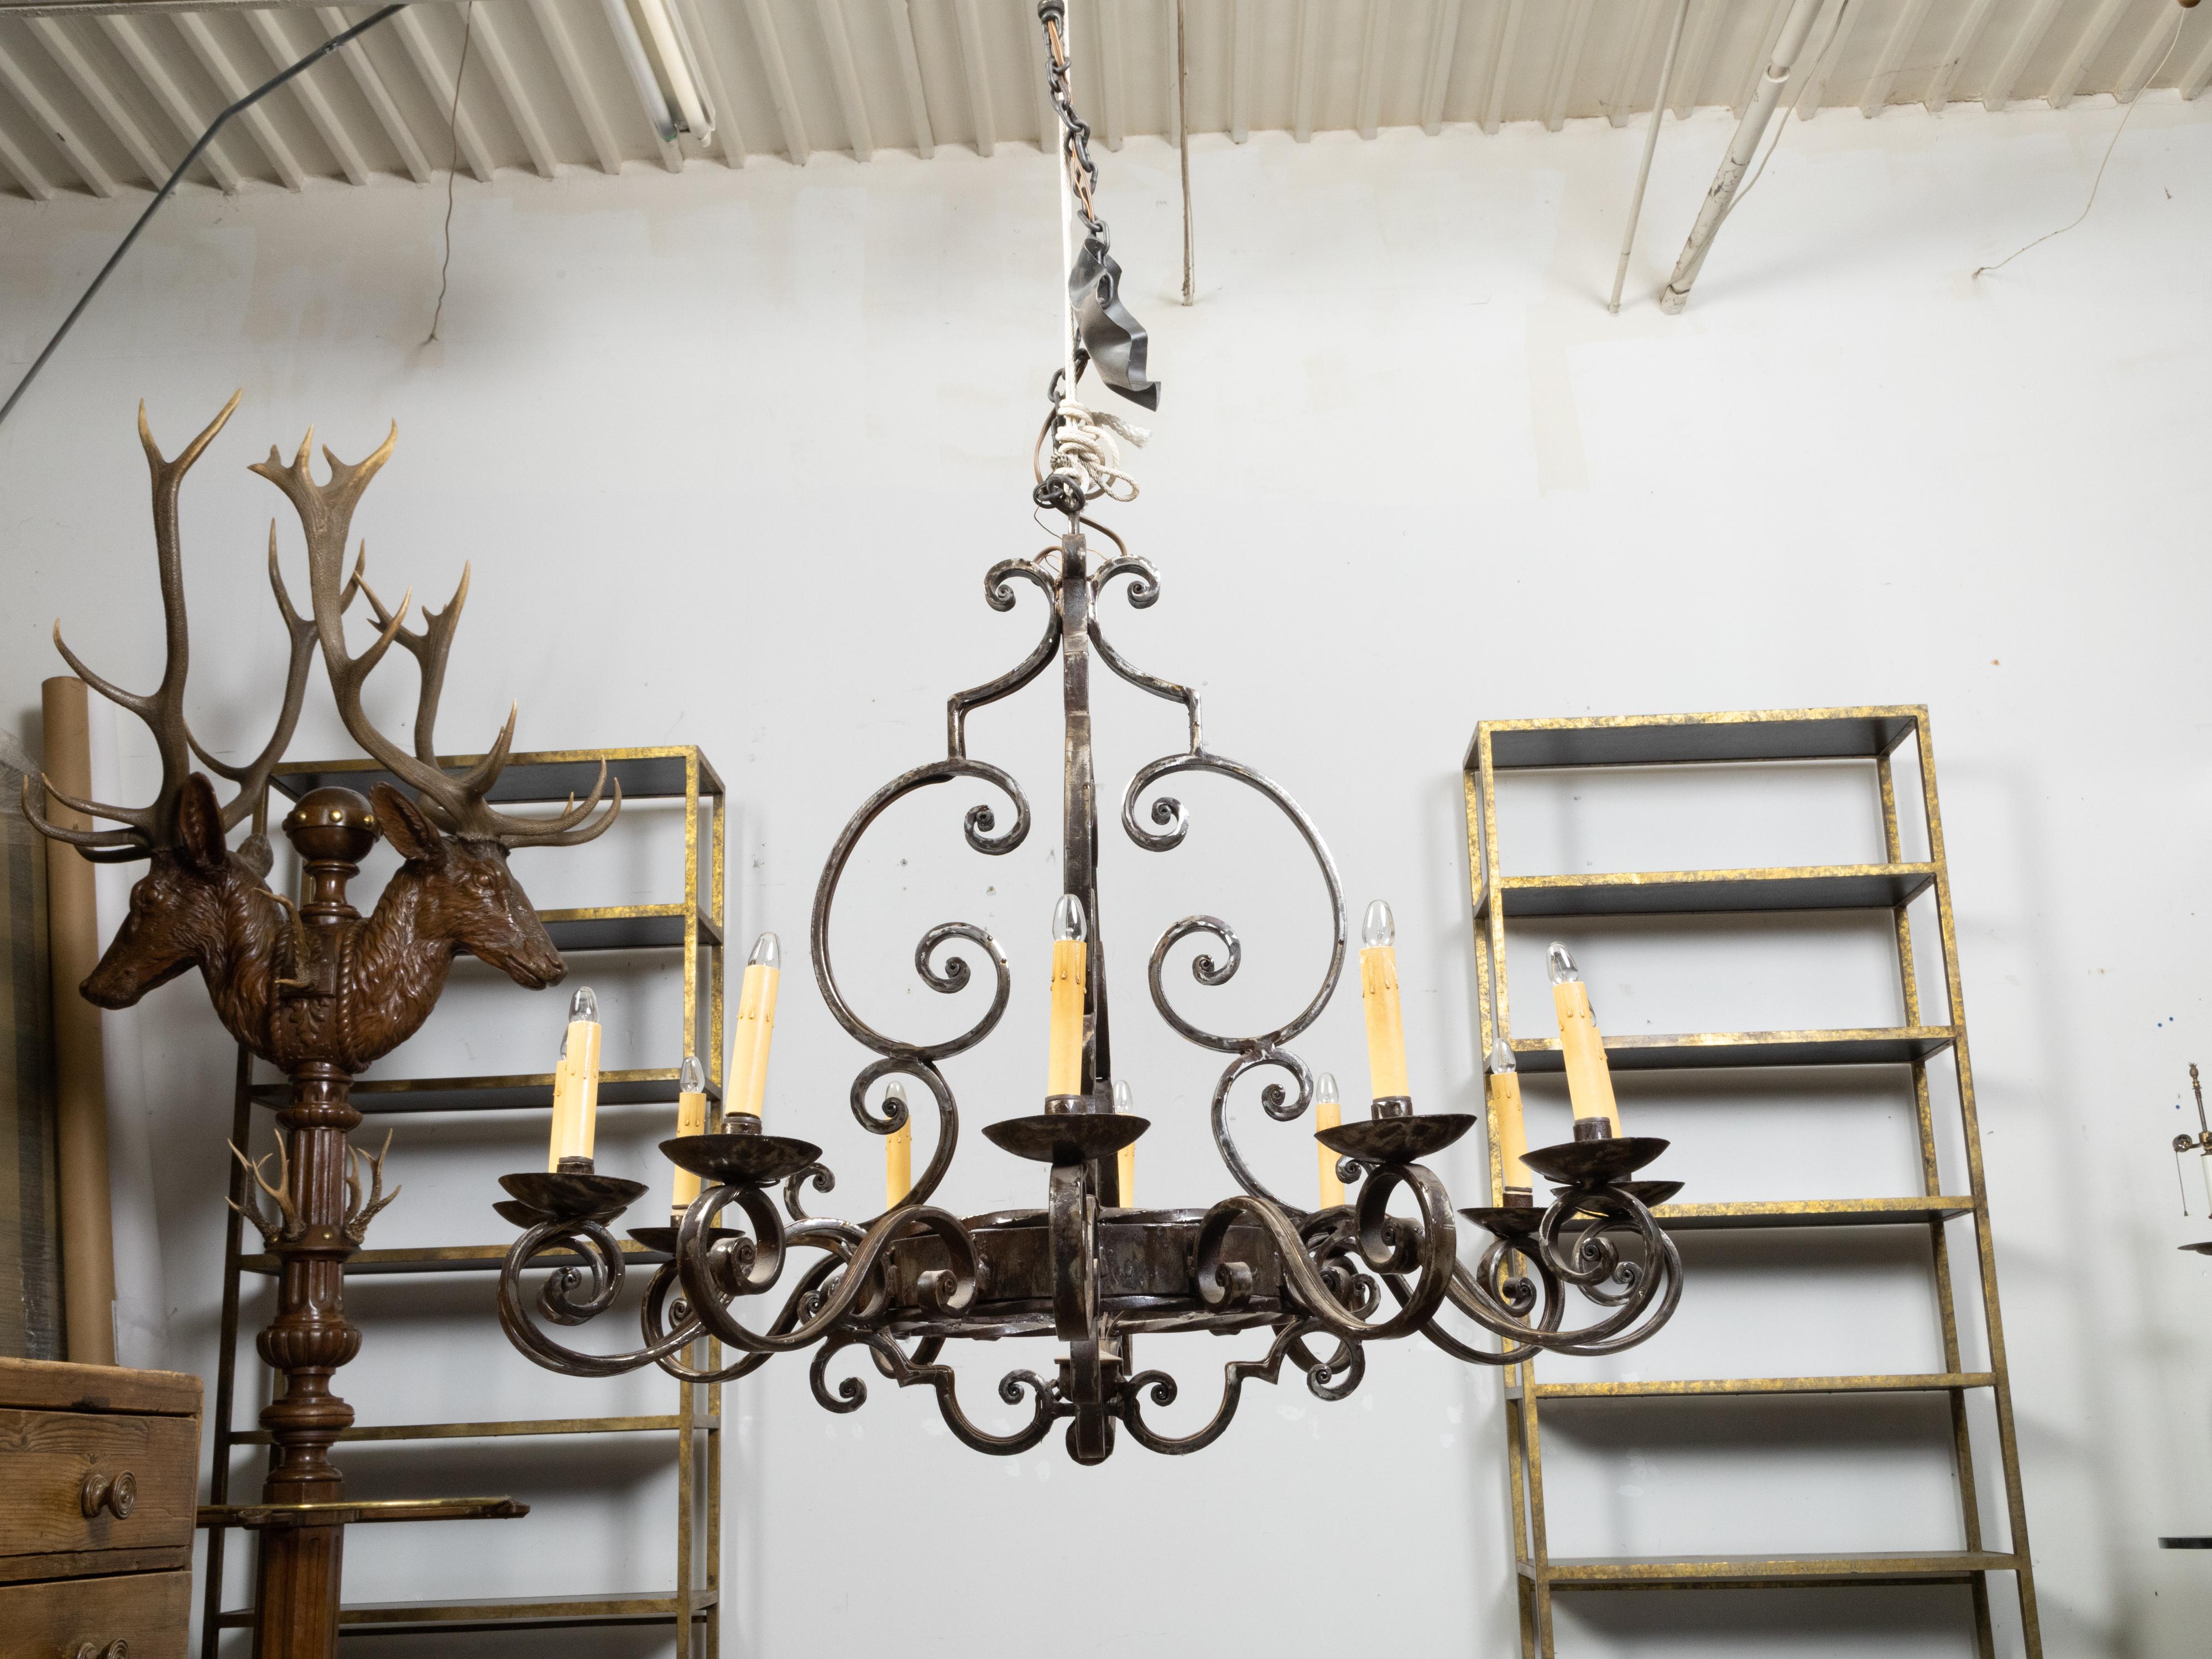 Midcentury French Steel 12-Light Chandelier with Scrolls and Dark Patina For Sale 2